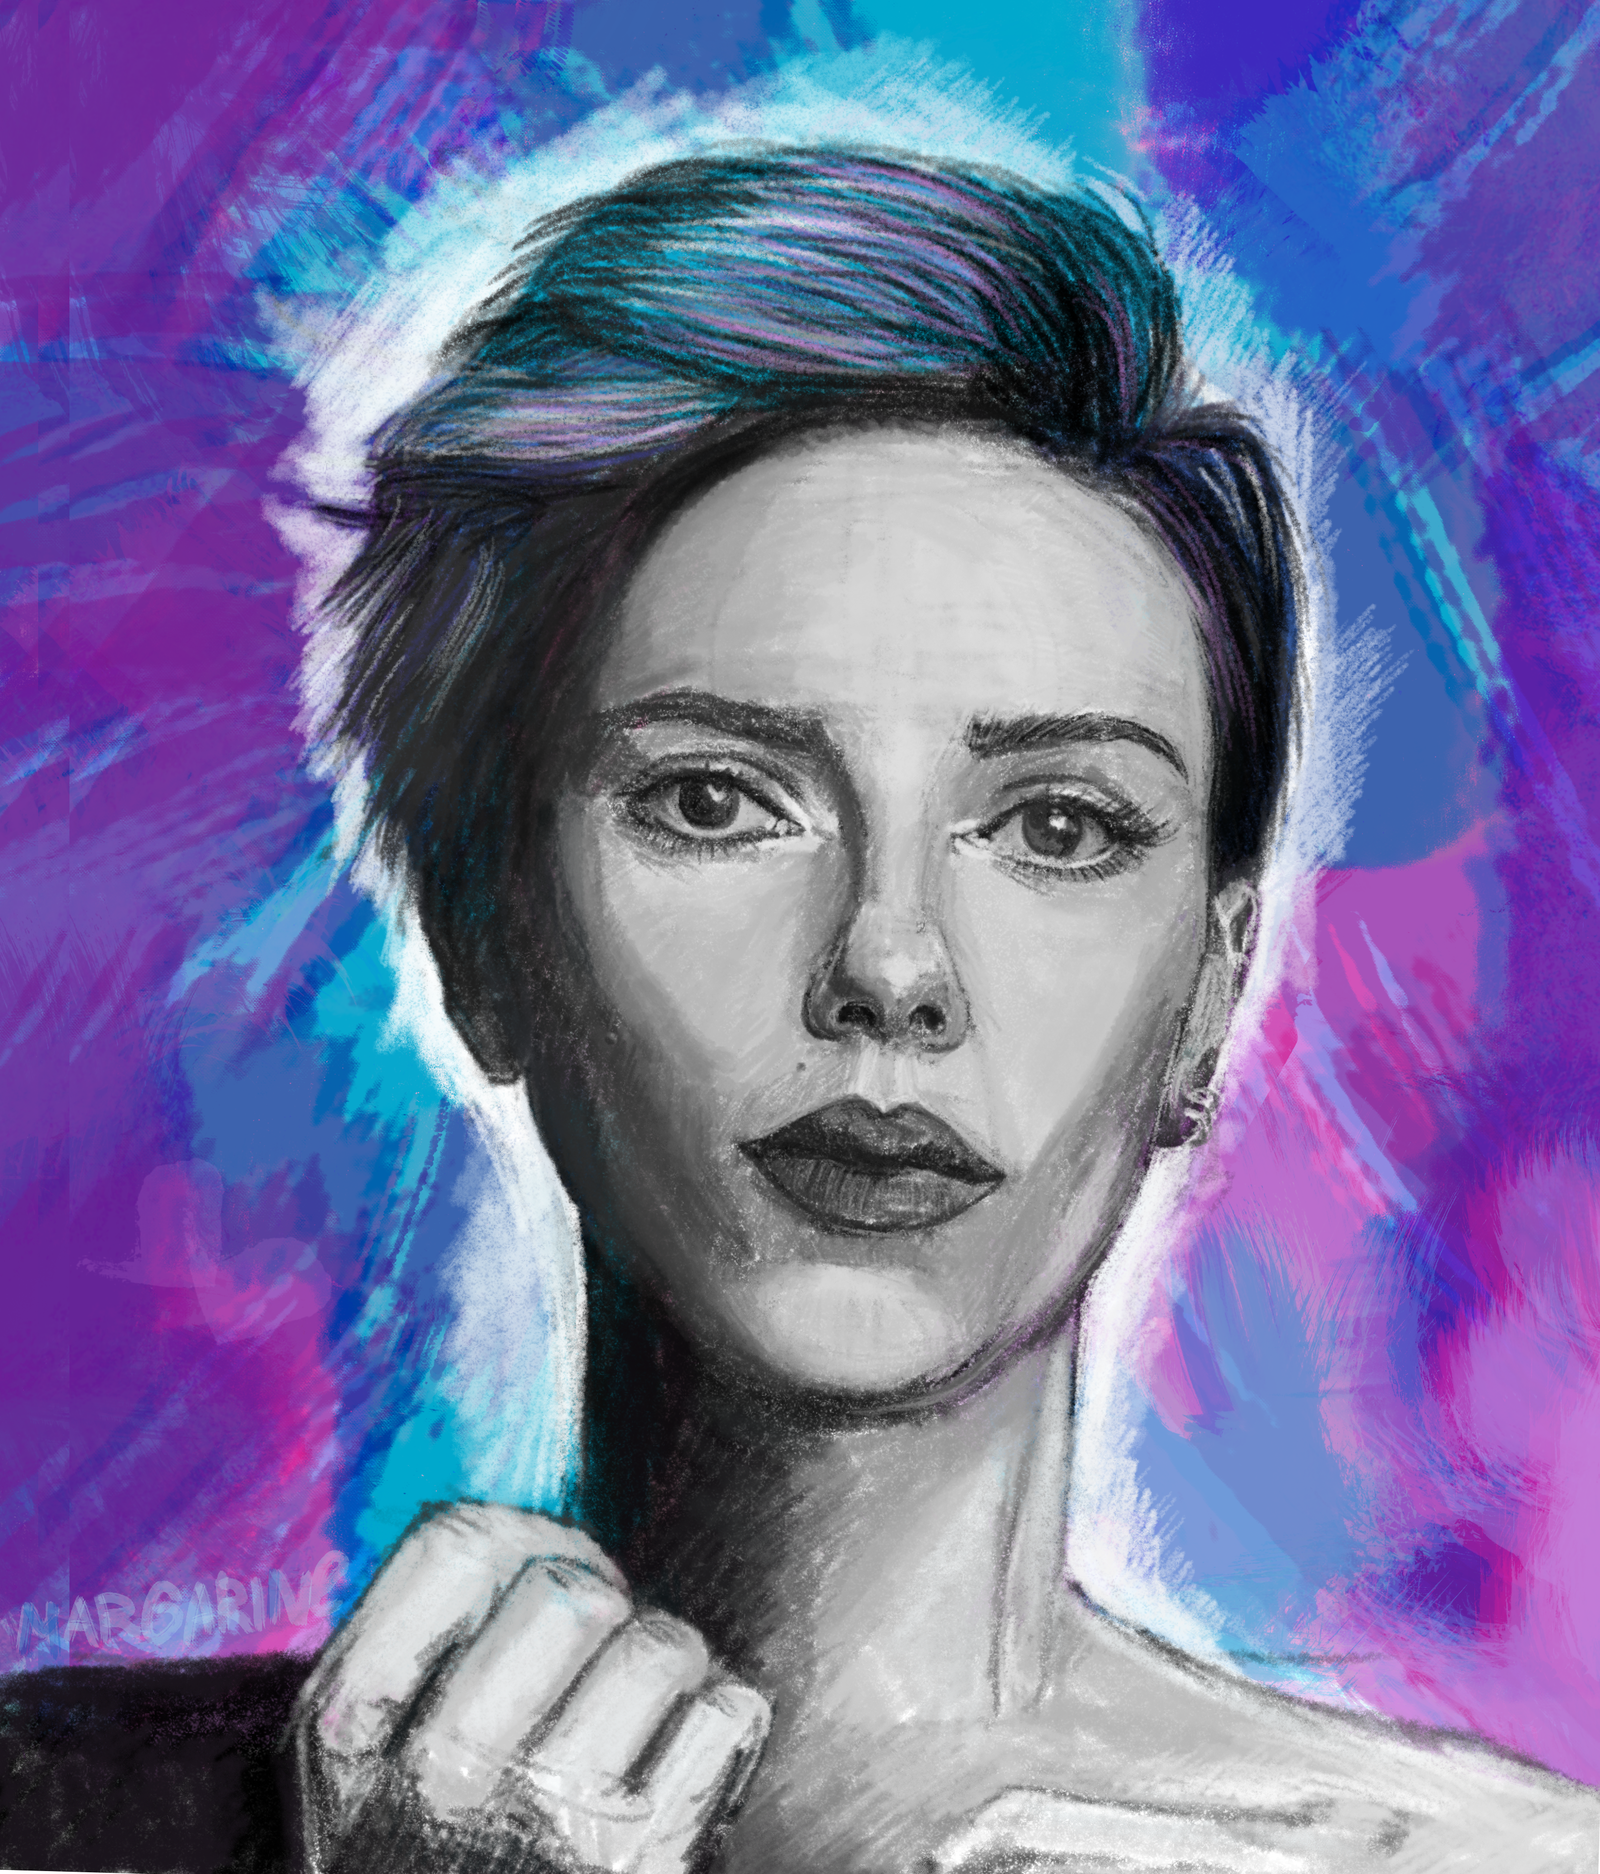 Tried new brushes for fsh) - My, Drawing, Art, Fan art, Scarlett Johansson, Actors and actresses